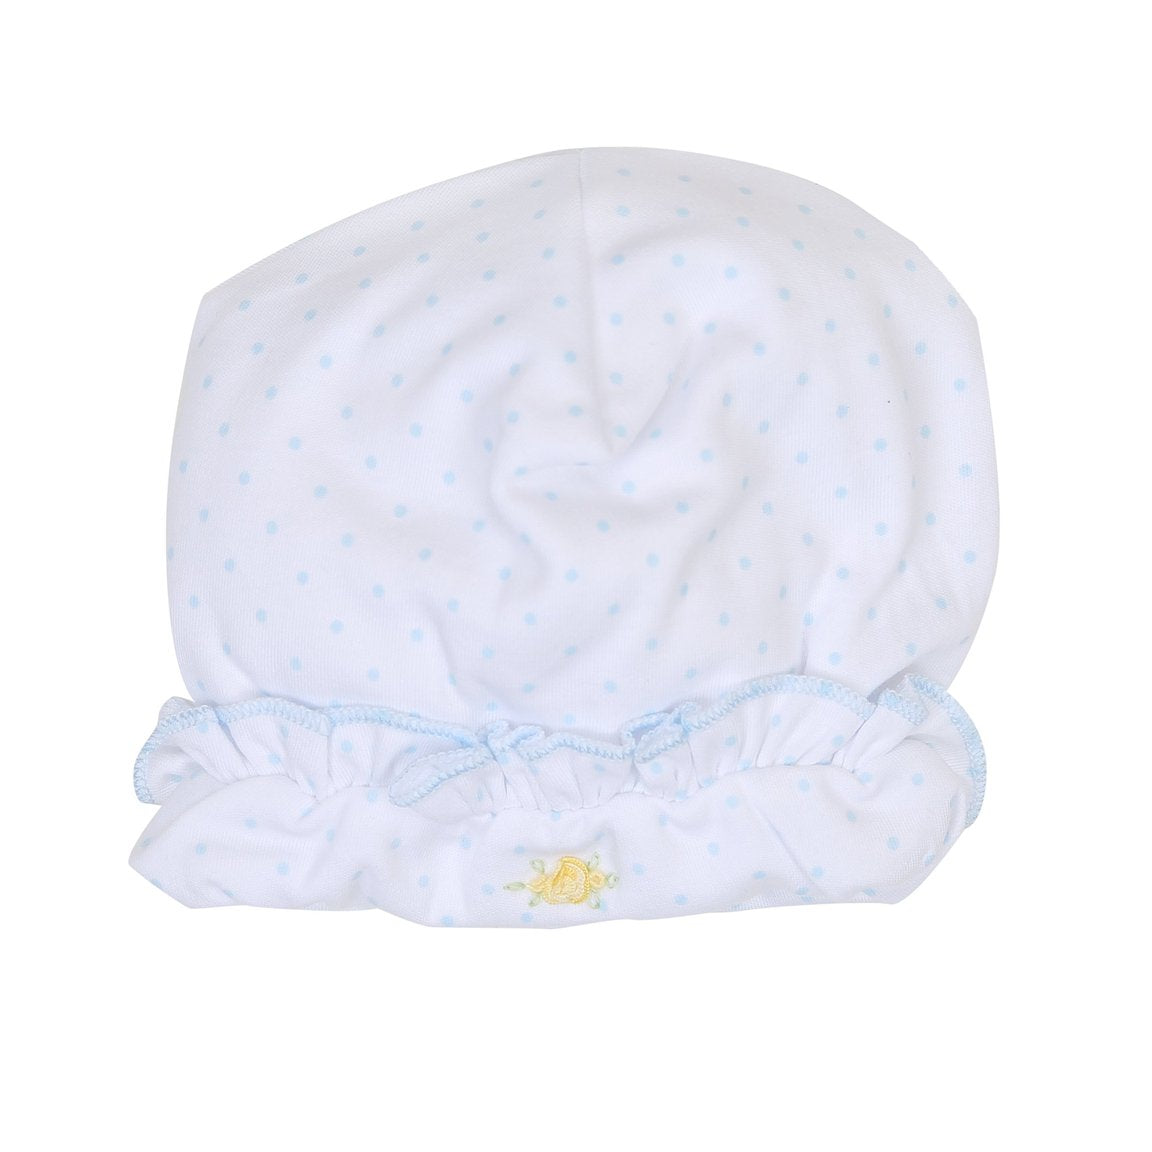 Faith's Classic Scattered Ruffle Converter & Hat